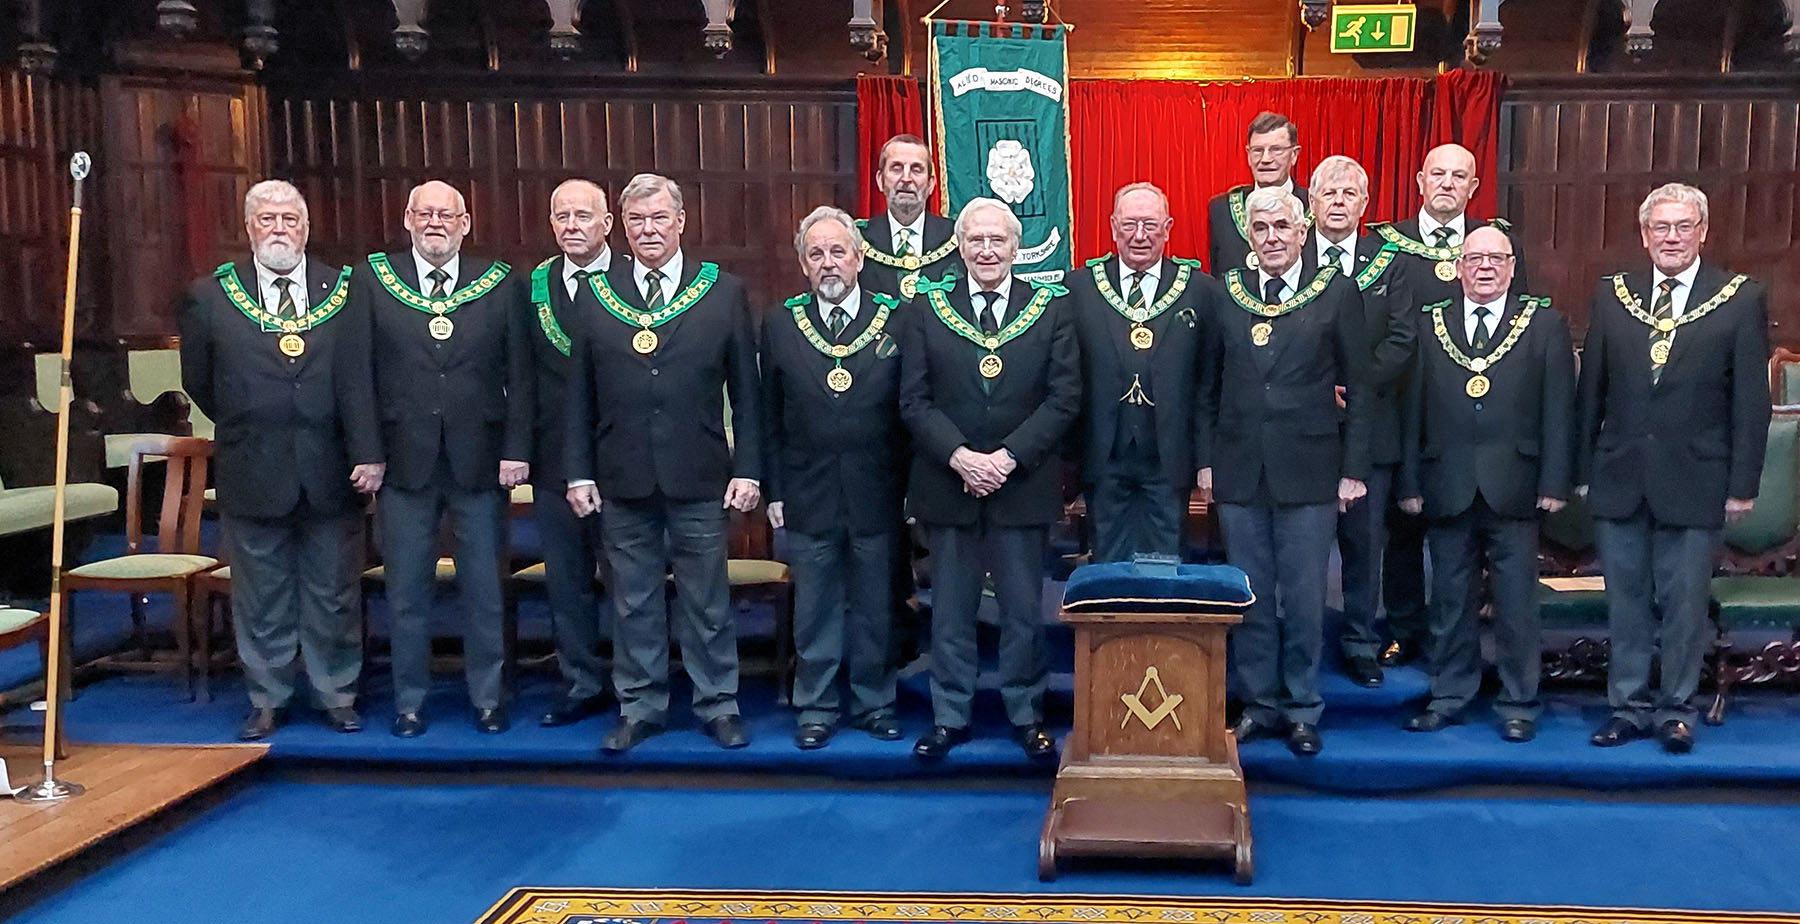 The D.G.P. for Yorkshire R. W. Bro. Brian Butterfield with all of the visiting D.G.P.'s